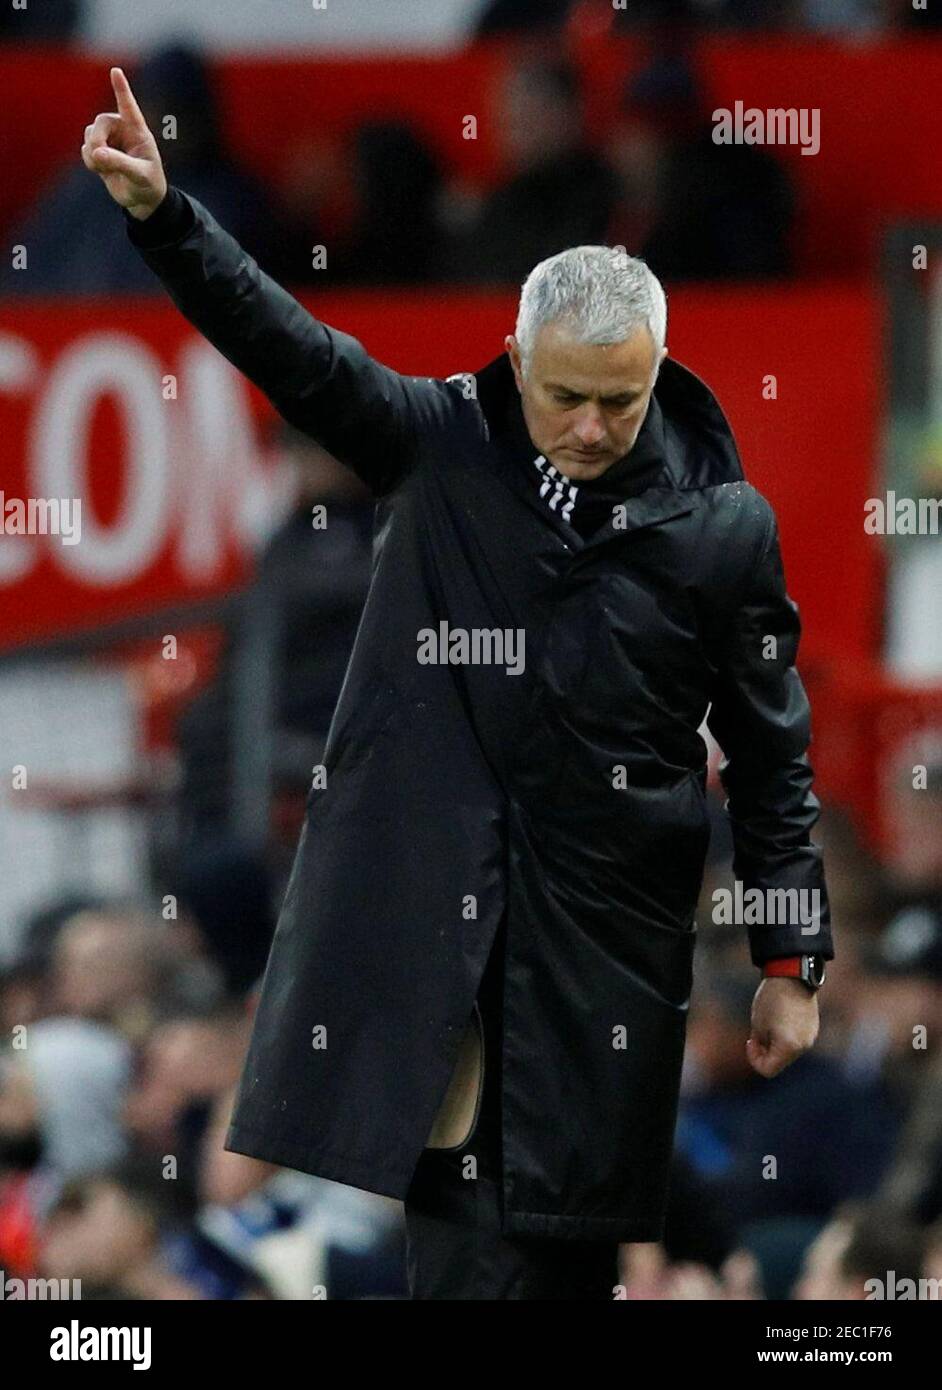 Soccer Football - Premier League - Manchester United v Fulham - Old Trafford, Manchester, Britain - December 8, 2018  Manchester United manager Jose Mourinho reacts  REUTERS/Phil Noble   EDITORIAL USE ONLY. No use with unauthorized audio, video, data, fixture lists, club/league logos or 'live' services. Online in-match use limited to 75 images, no video emulation. No use in betting, games or single club/league/player publications.  Please contact your account representative for further details. Stock Photo